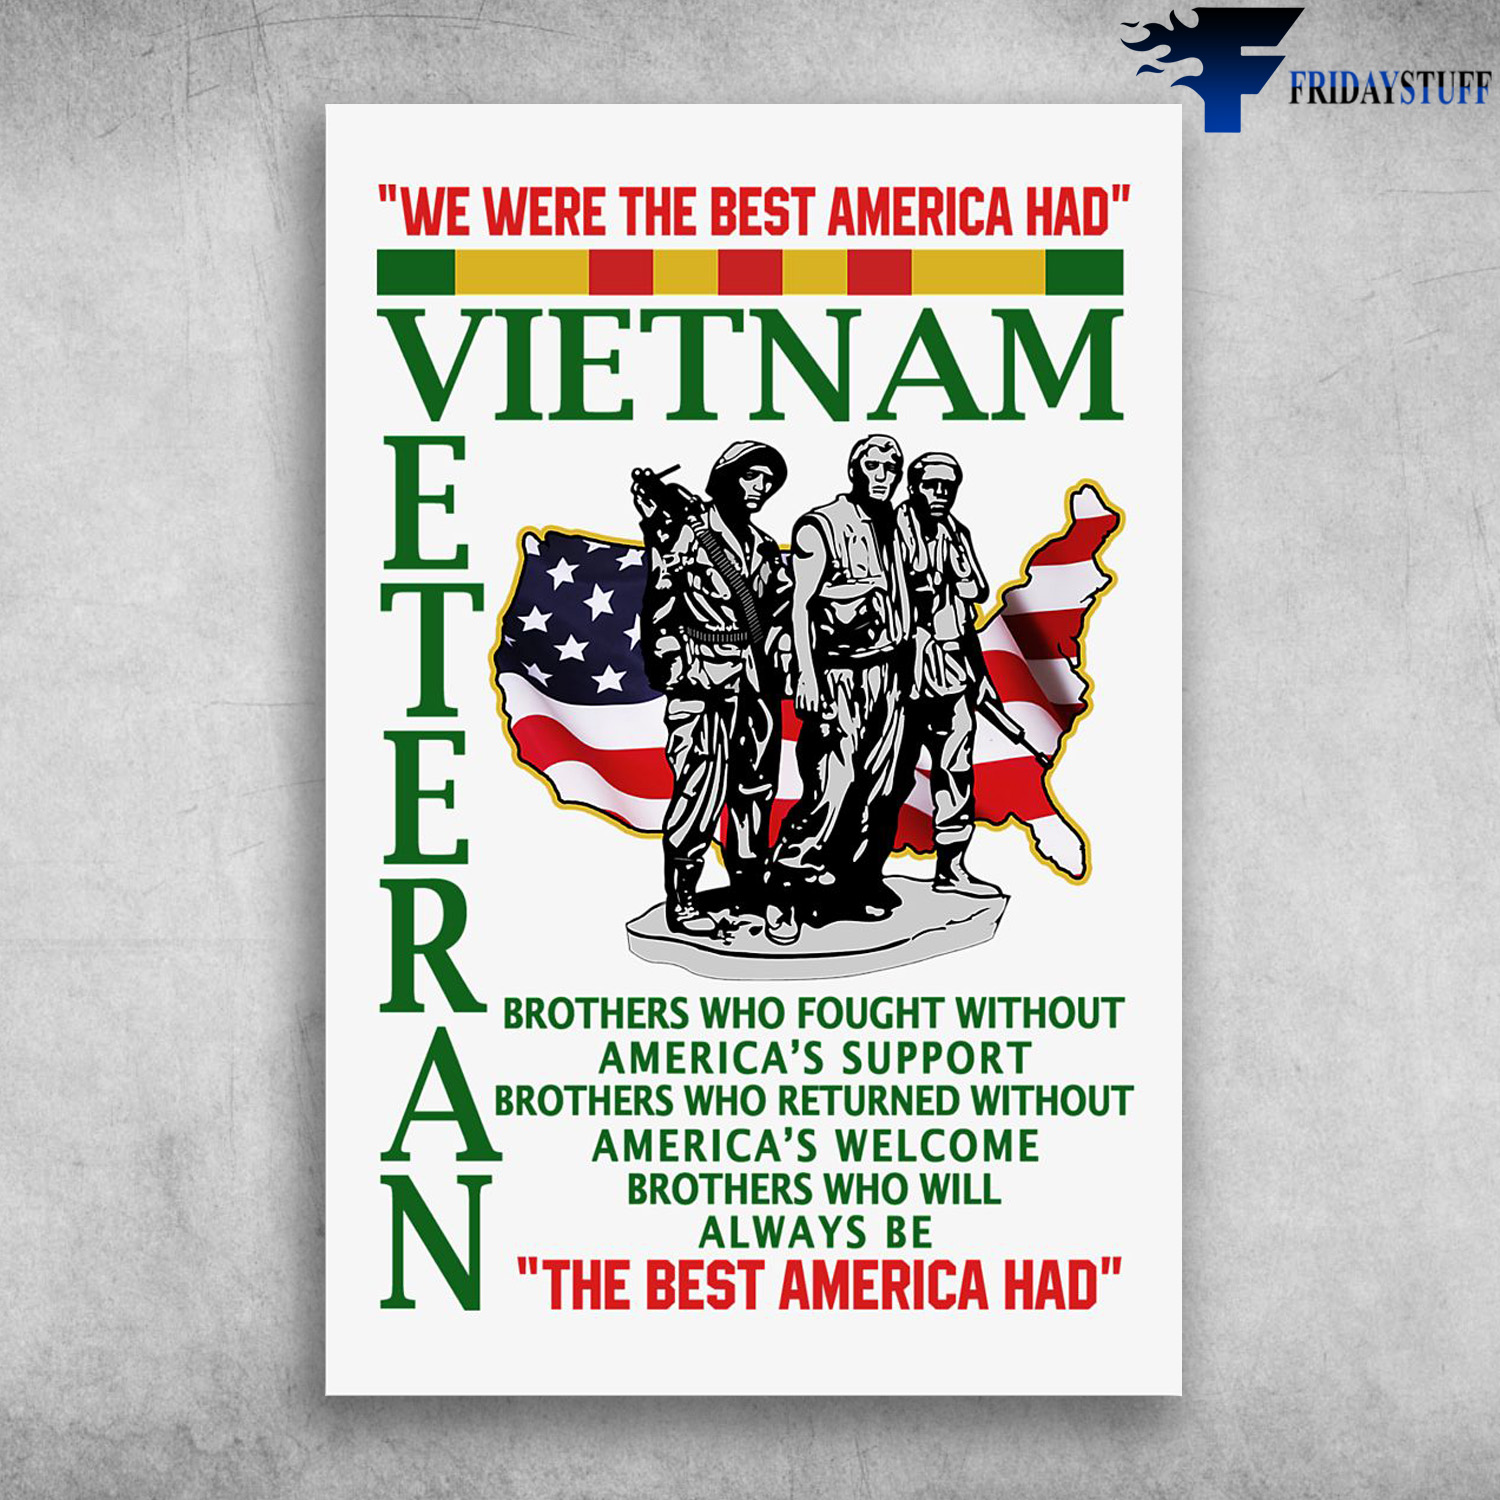 Viet Nam - We Are The Best American Had, Brothers Who Fought Without America's Support